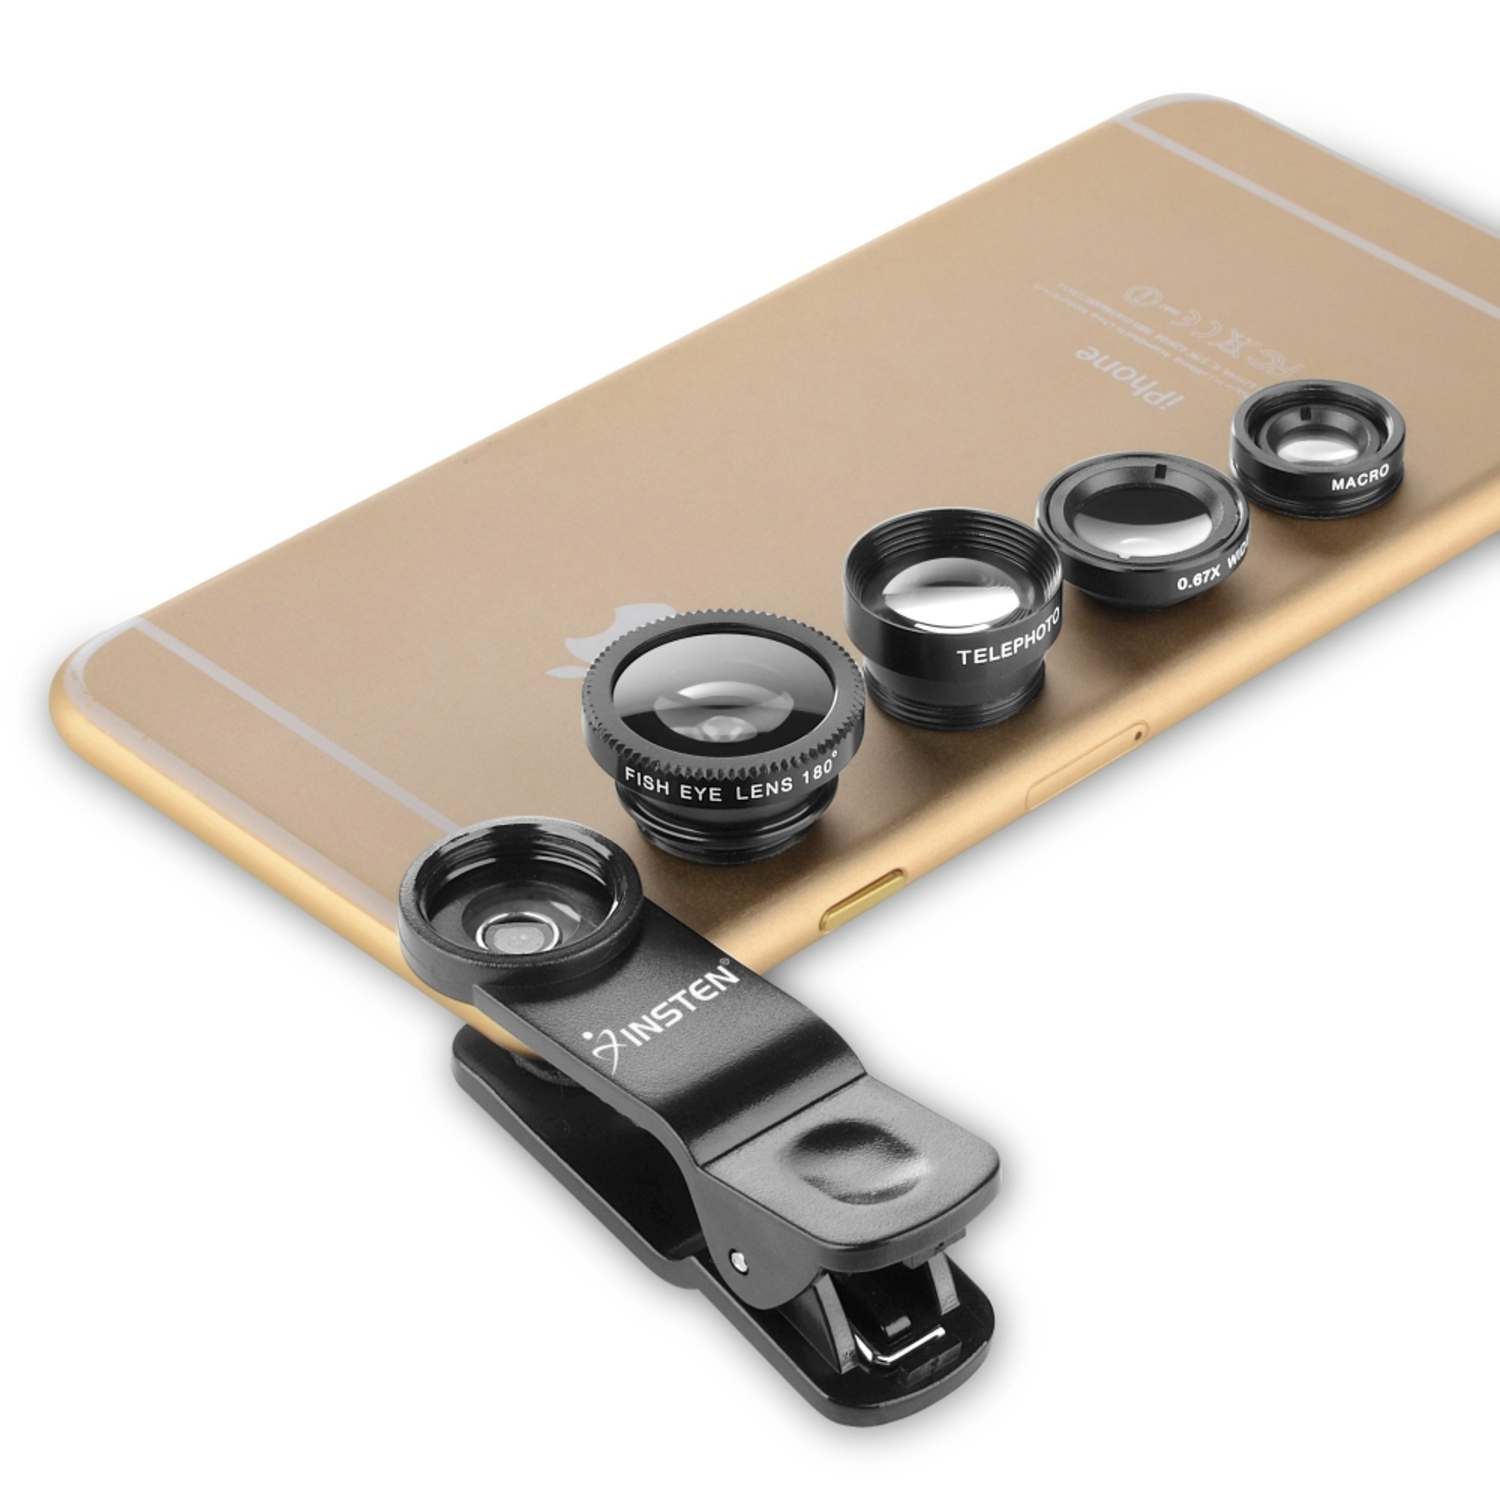 Insten 4-in-1 Universal Clip-on Lens Kit - Wide Angle/ Macro/ Fisheye/ Telephoto For iPhone Samsung HTC and More Smartphones, Black